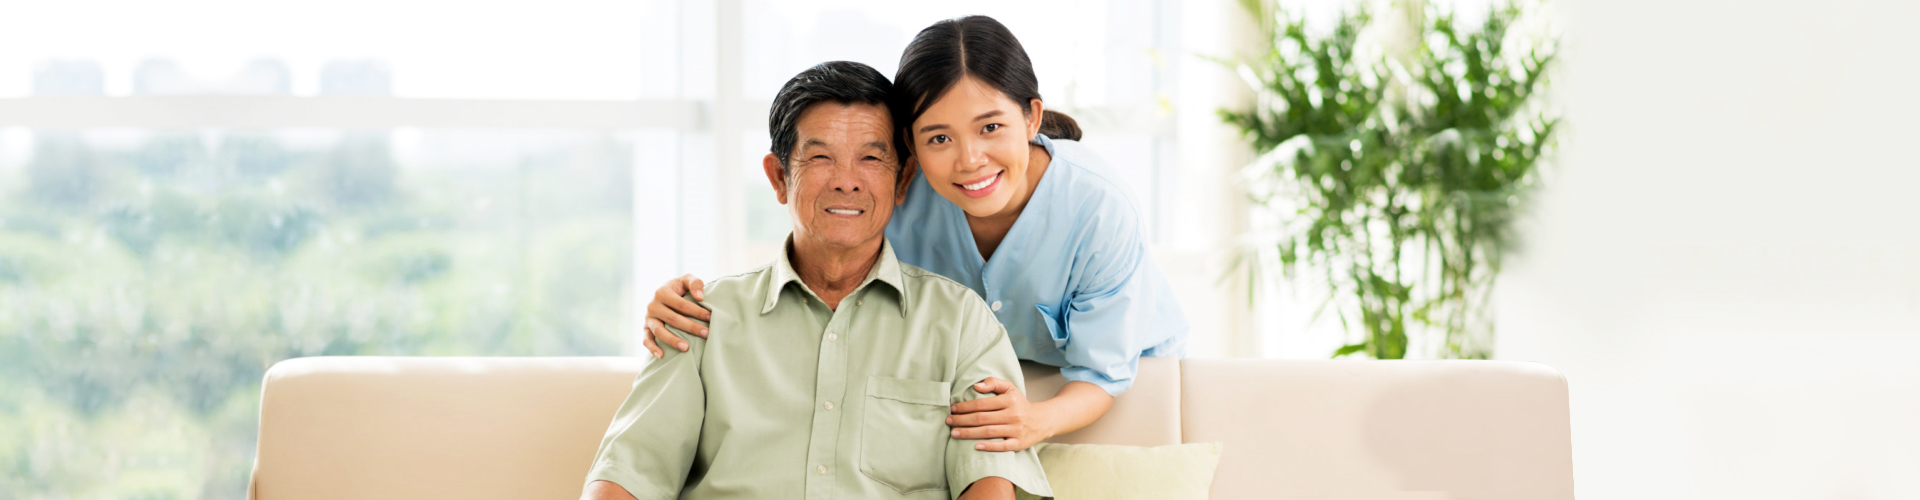 health care worker smiling with elderly man sitting on couch